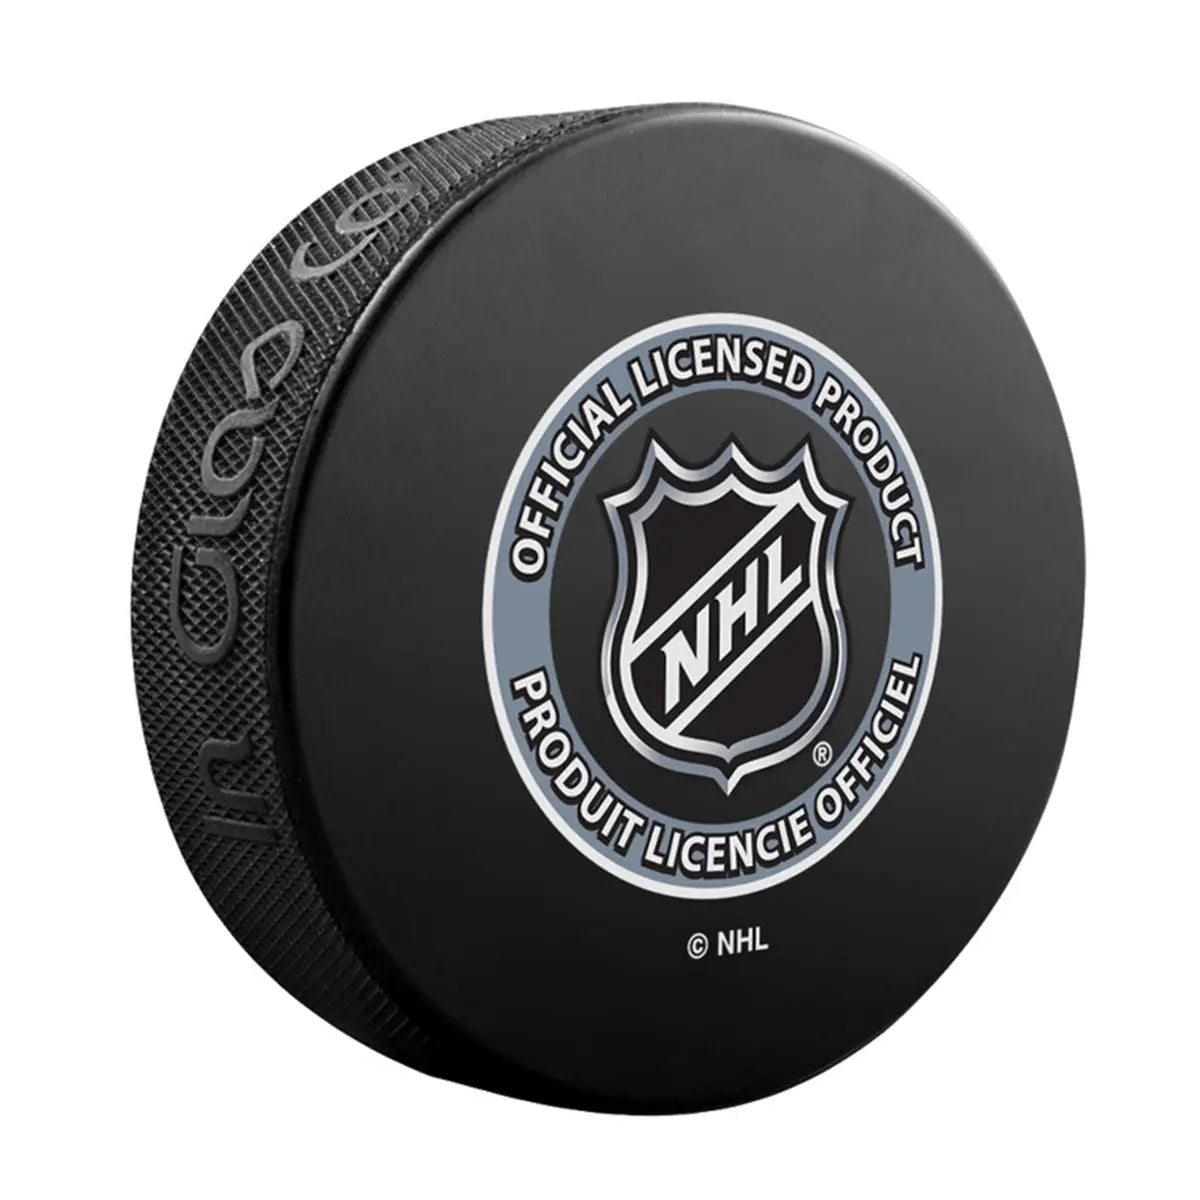 Detroit Red Wings Basic Collectors NHL Hockey Game Puck 